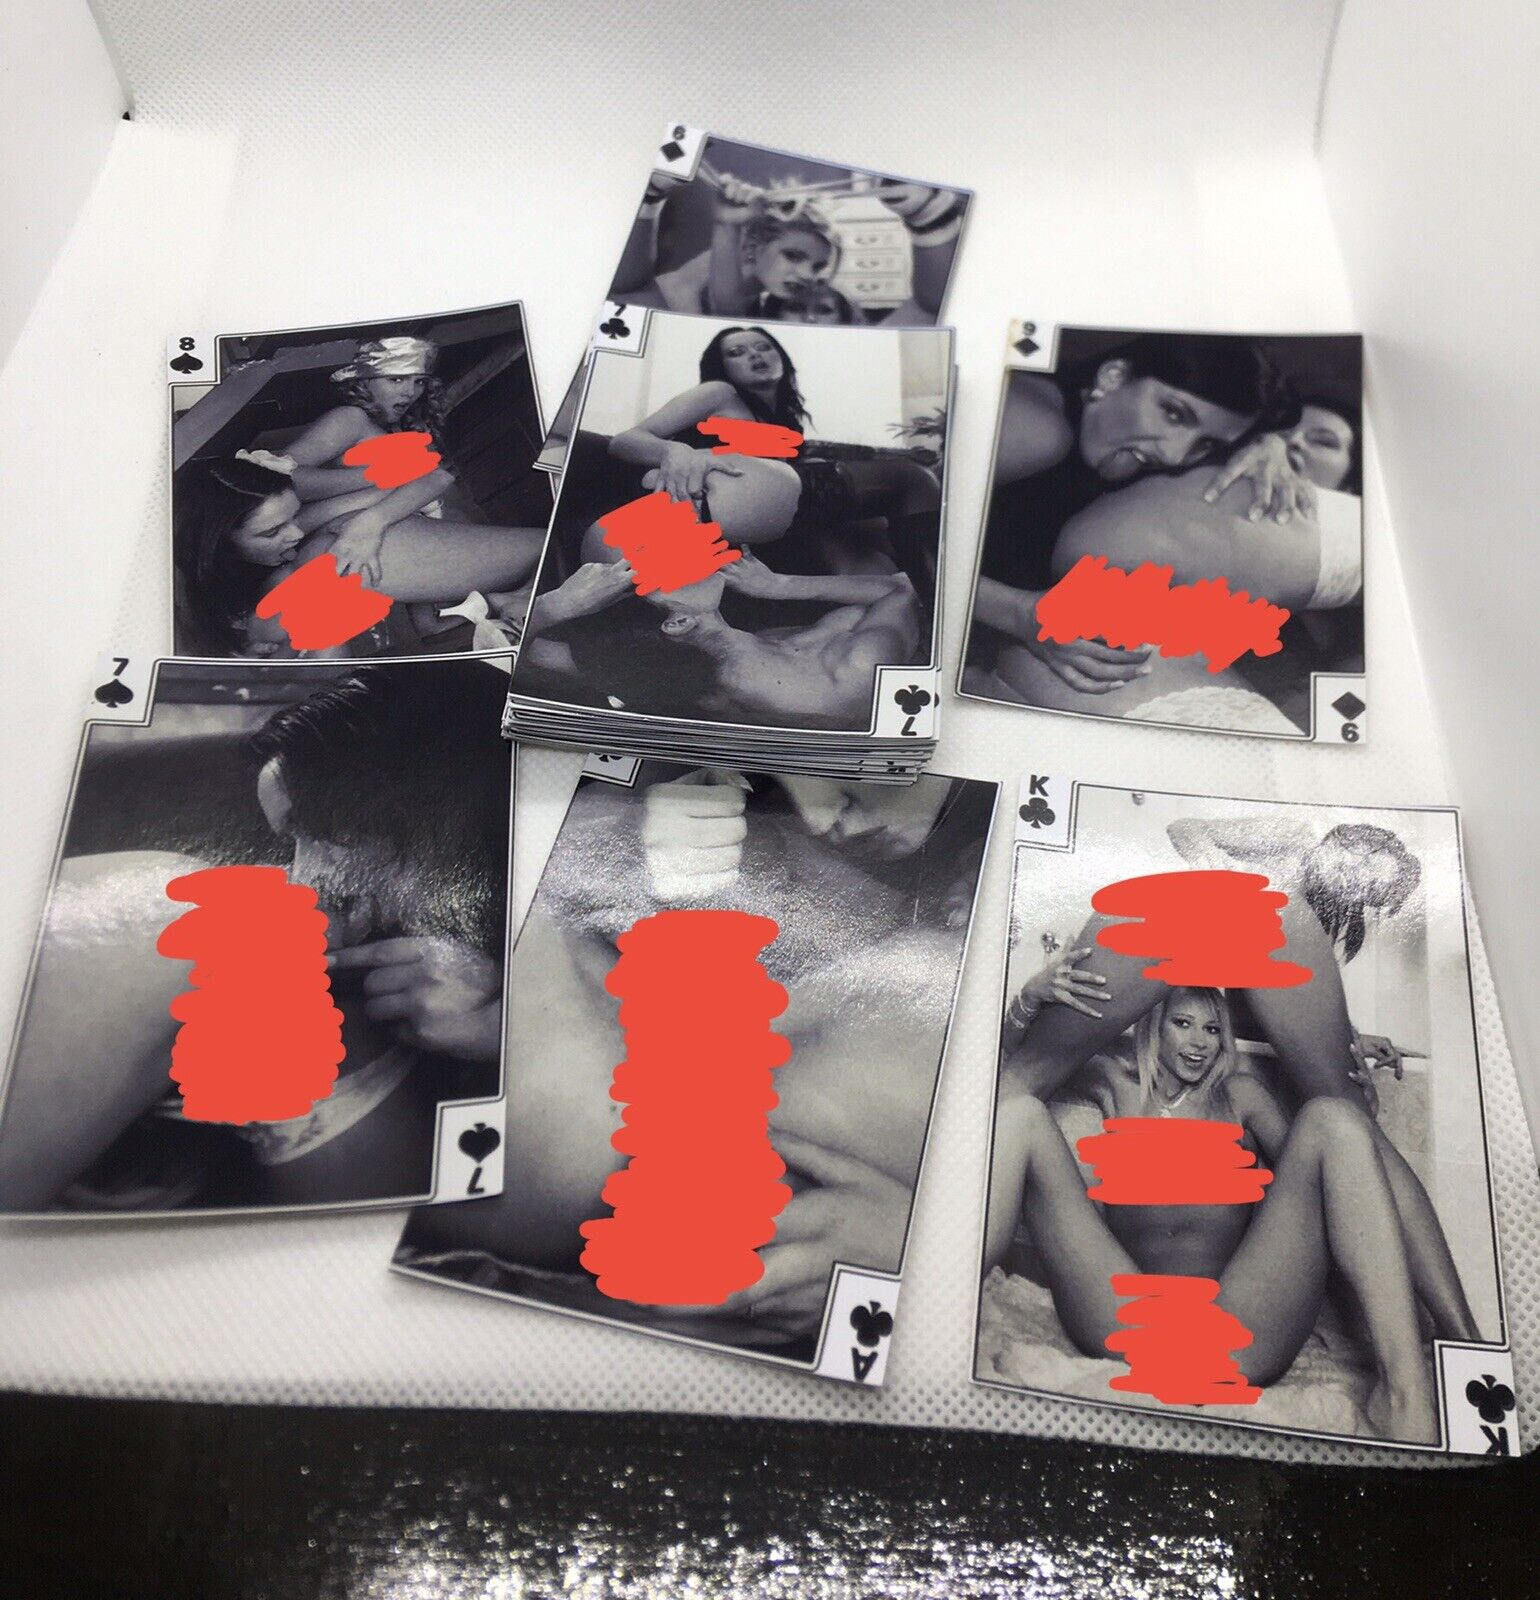 Nude playing cards, naked women. Models. 36 in deck.